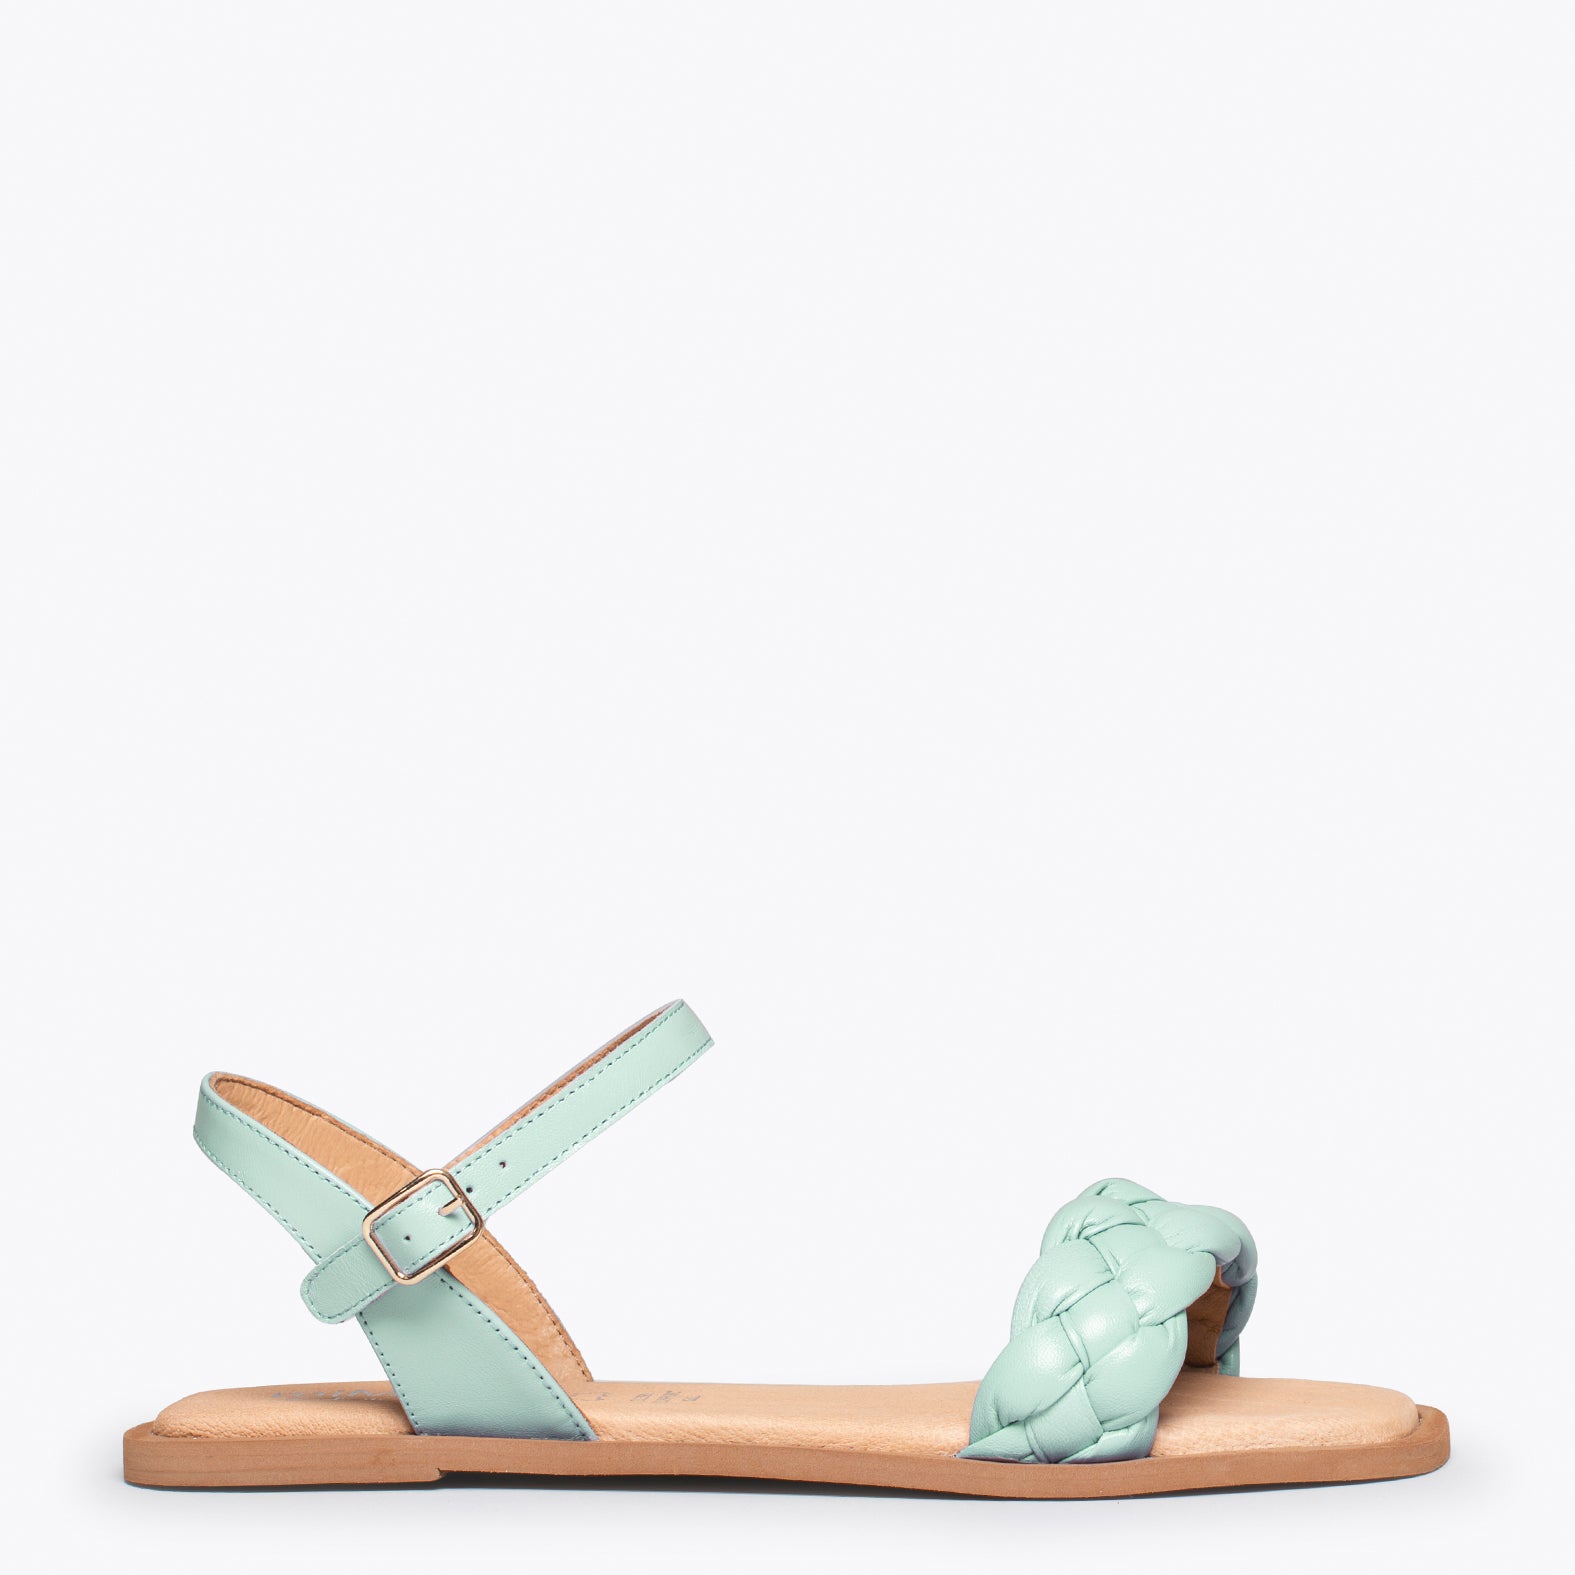 MARBELLA – GREEN flat sandals with braided strap